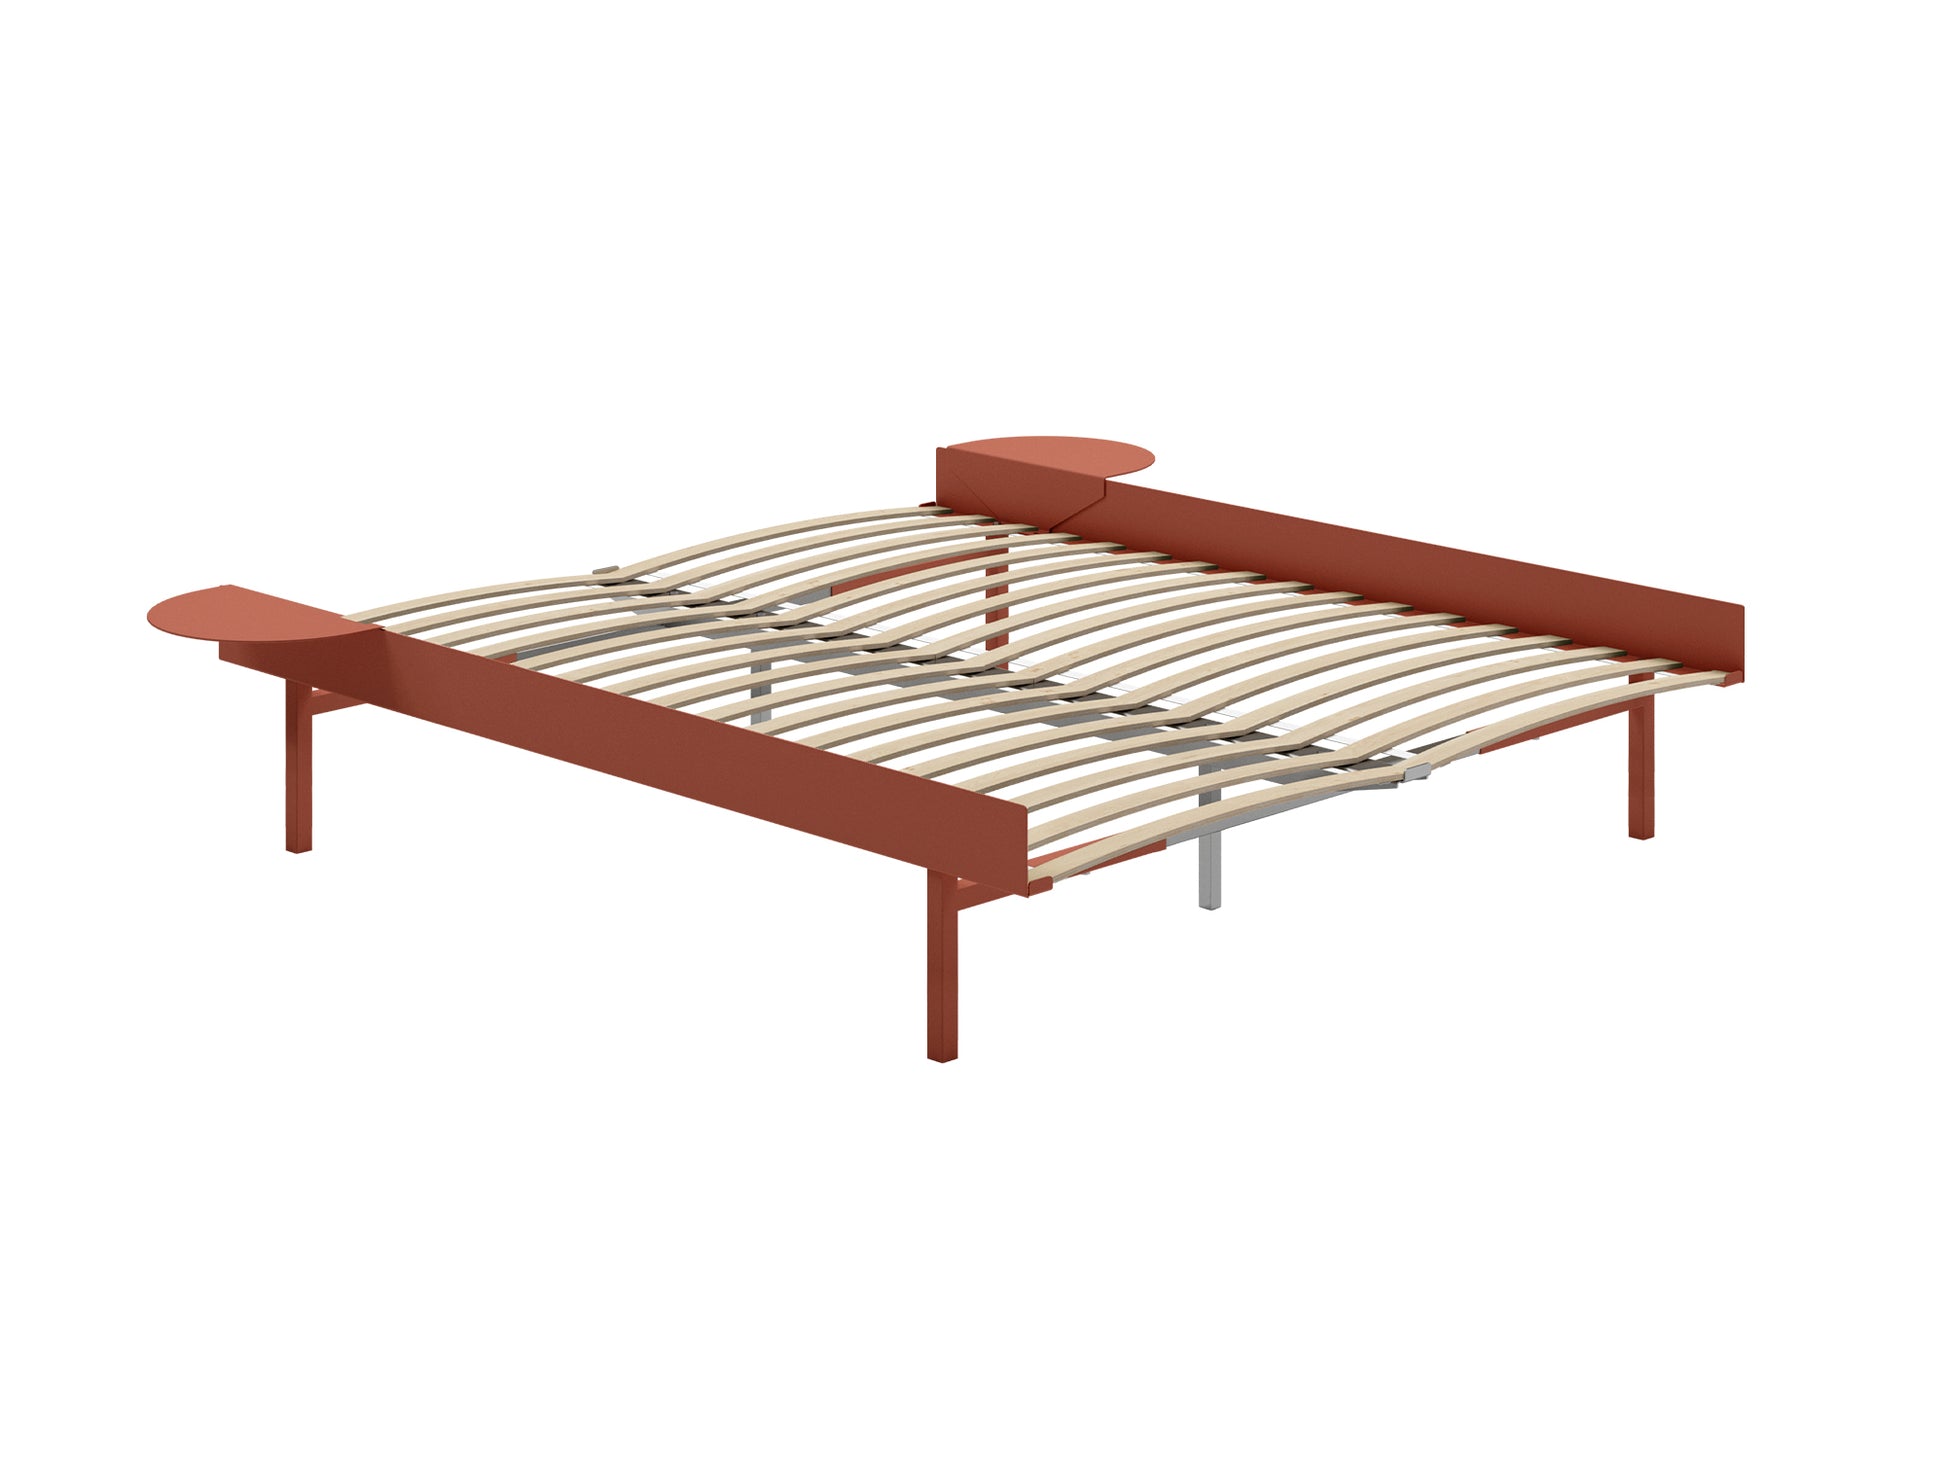 Bed 90 - 180 cm (High) by Moebe- Bed Frame / with 160cm wide Slats / 2 Side Table /  Terracotta